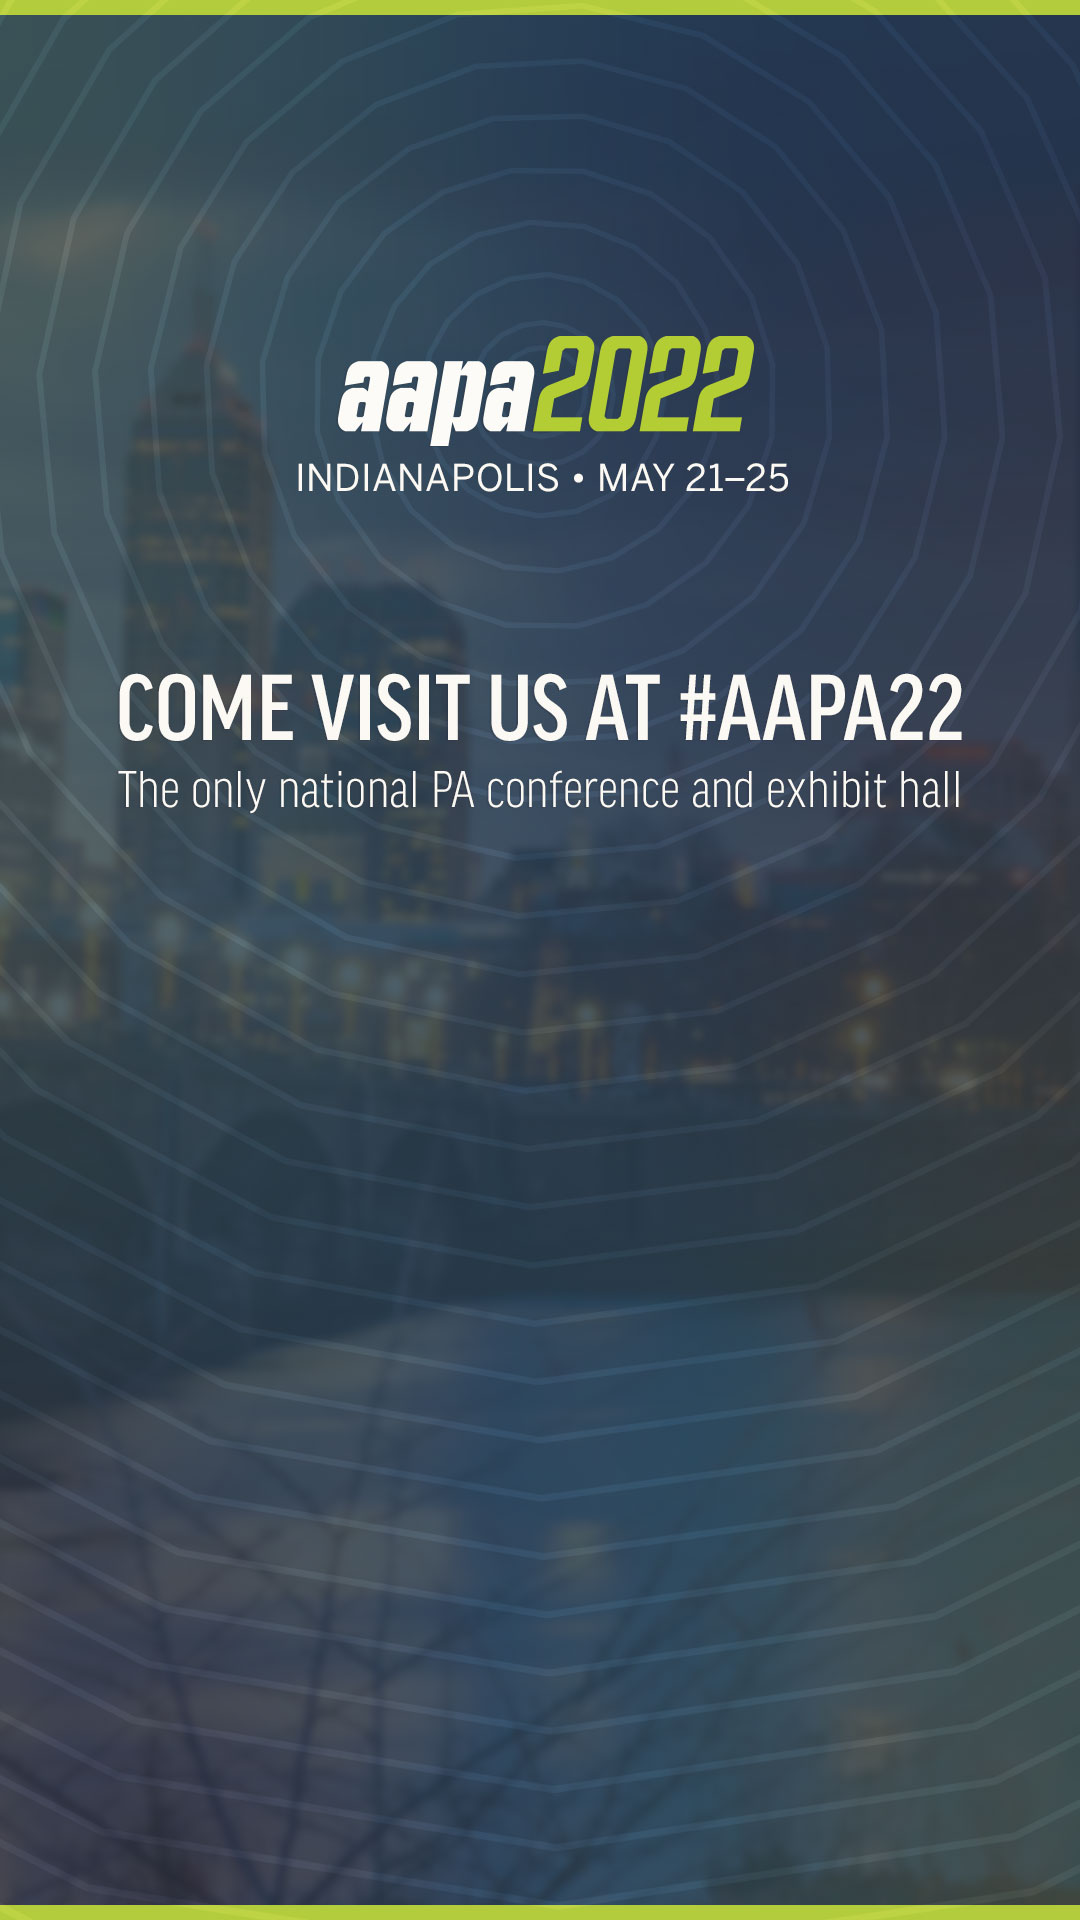 'Official Exhibitor at AAPA 2022' sized for Instagram